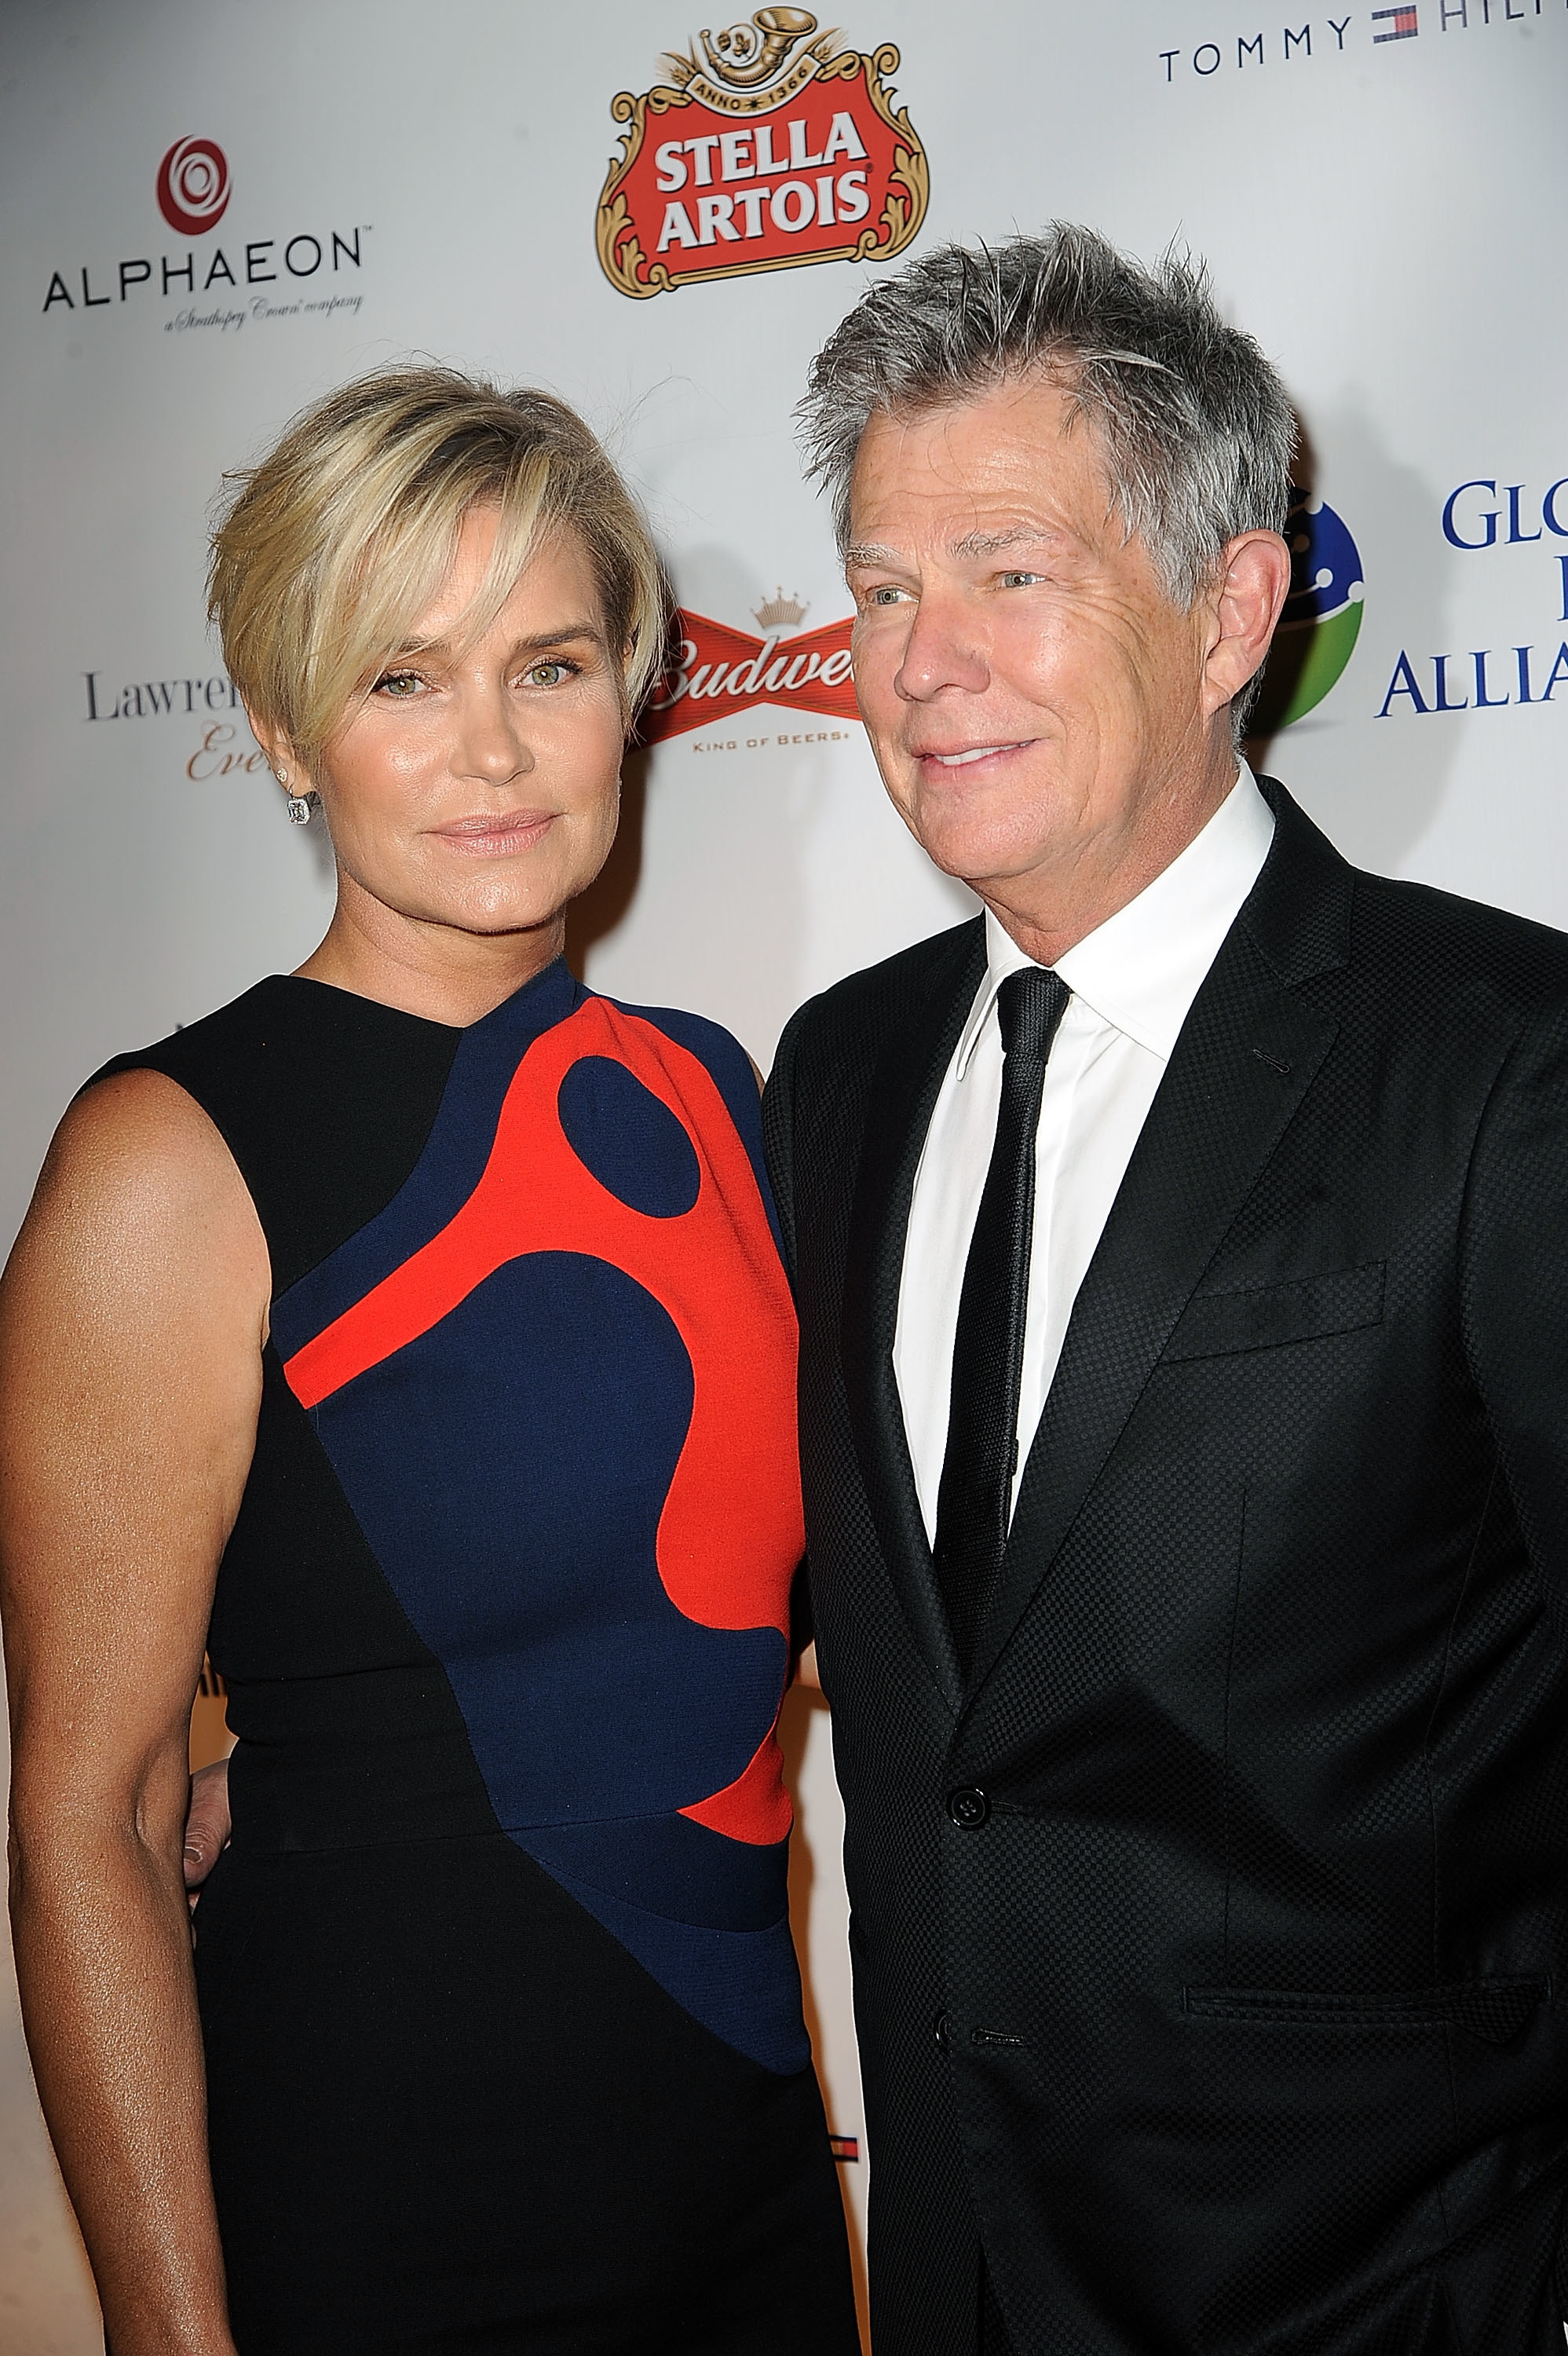 Yolanda Foster and David Foster attend 2015 Global Lyme Alliance Gala at Cipriani 42nd Street on October 8, 2015